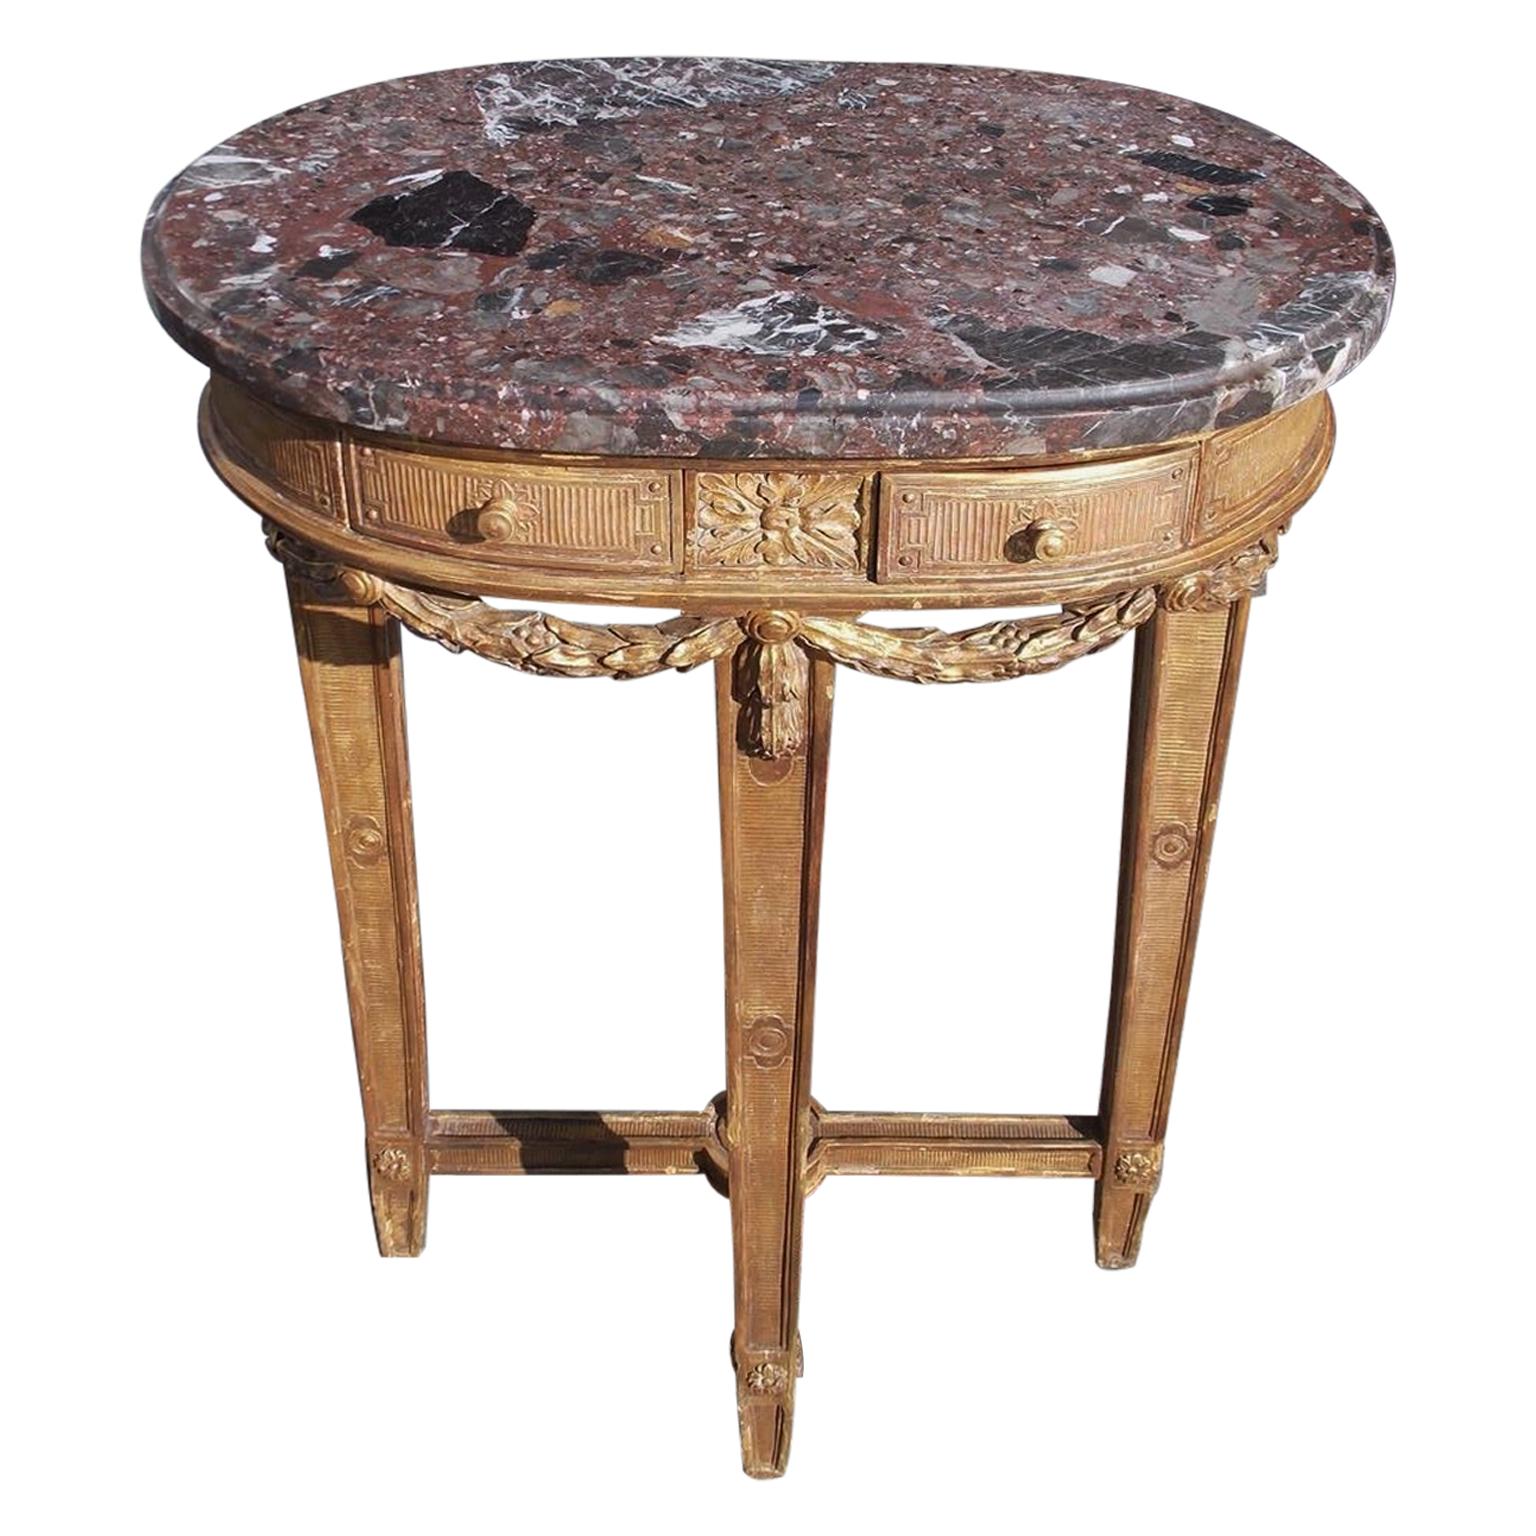 French Oval Gilt wood Marble Side Table with Floral Medallion & Swags, C. 1780 For Sale